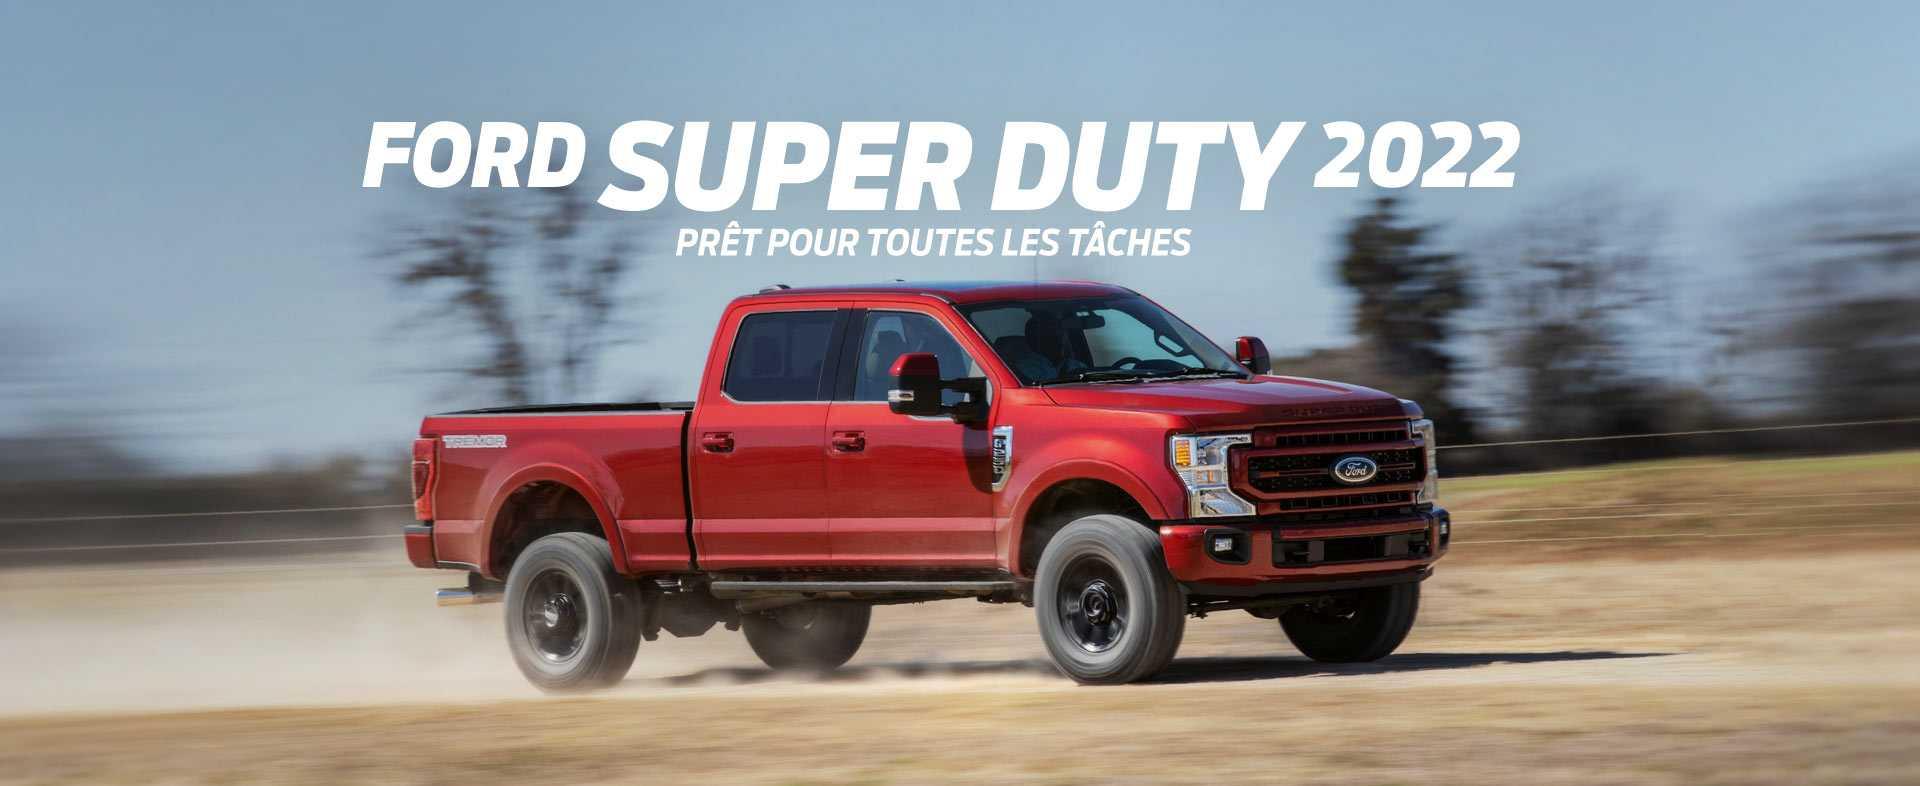 Ford Super Duty 2022